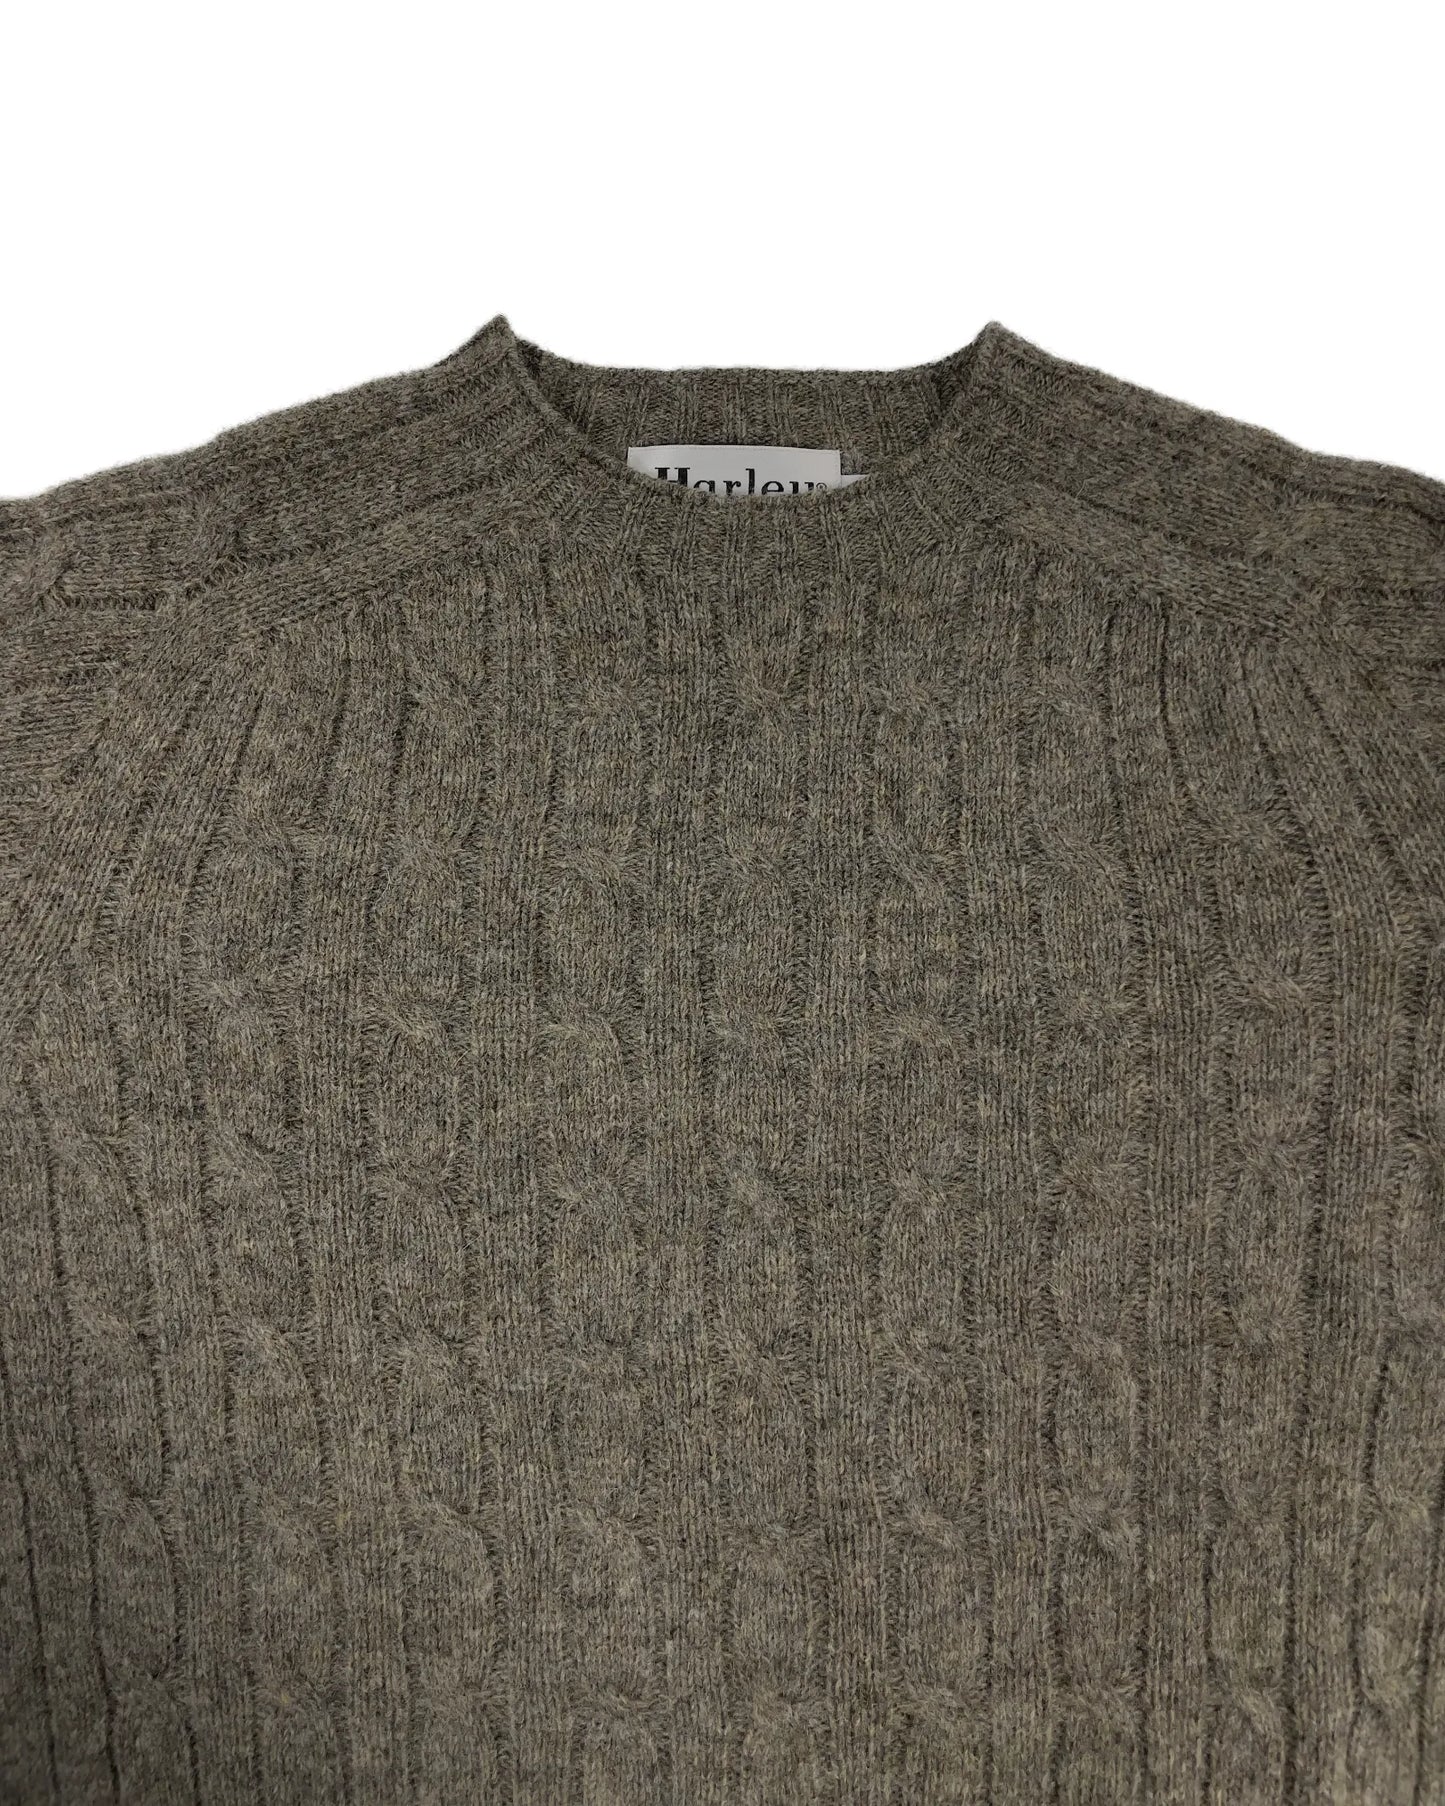 Mens Knitted Crew Neck Jumper (M3233/7) - Oyster